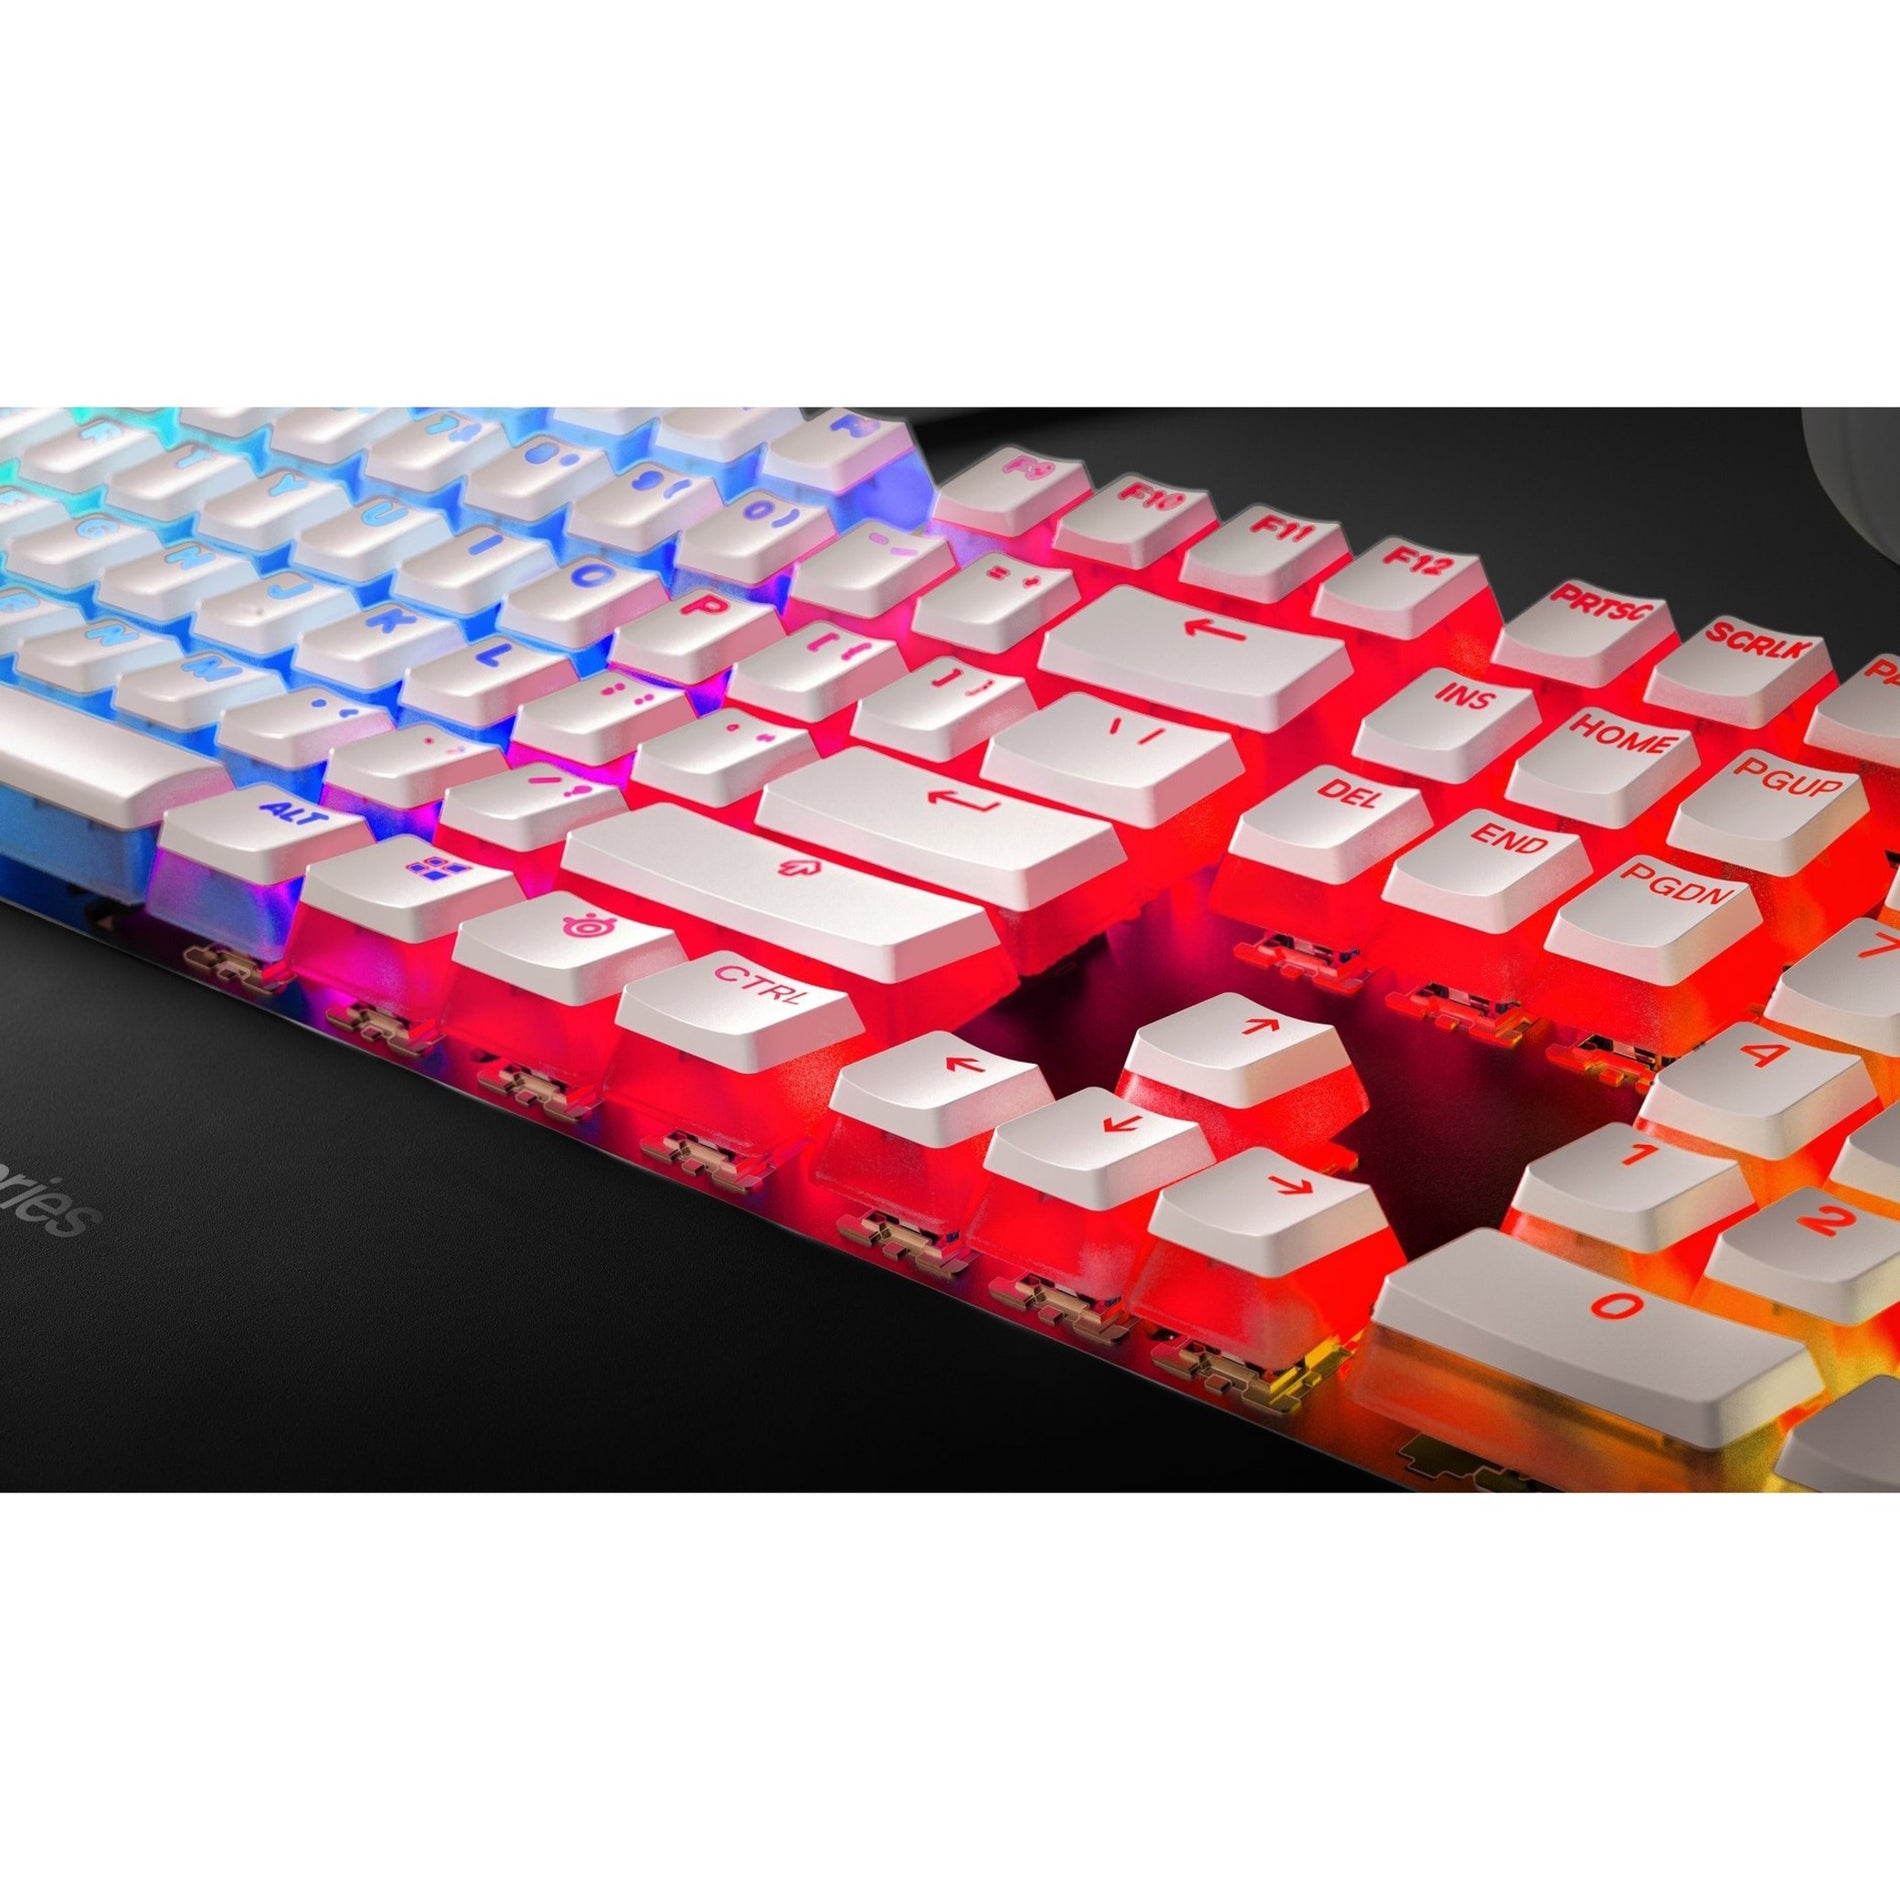 SteelSeries 60203 PrismCaps Universal Double Shot PBT Keycaps, White, Durable and Stylish Keycaps for Your Keyboard